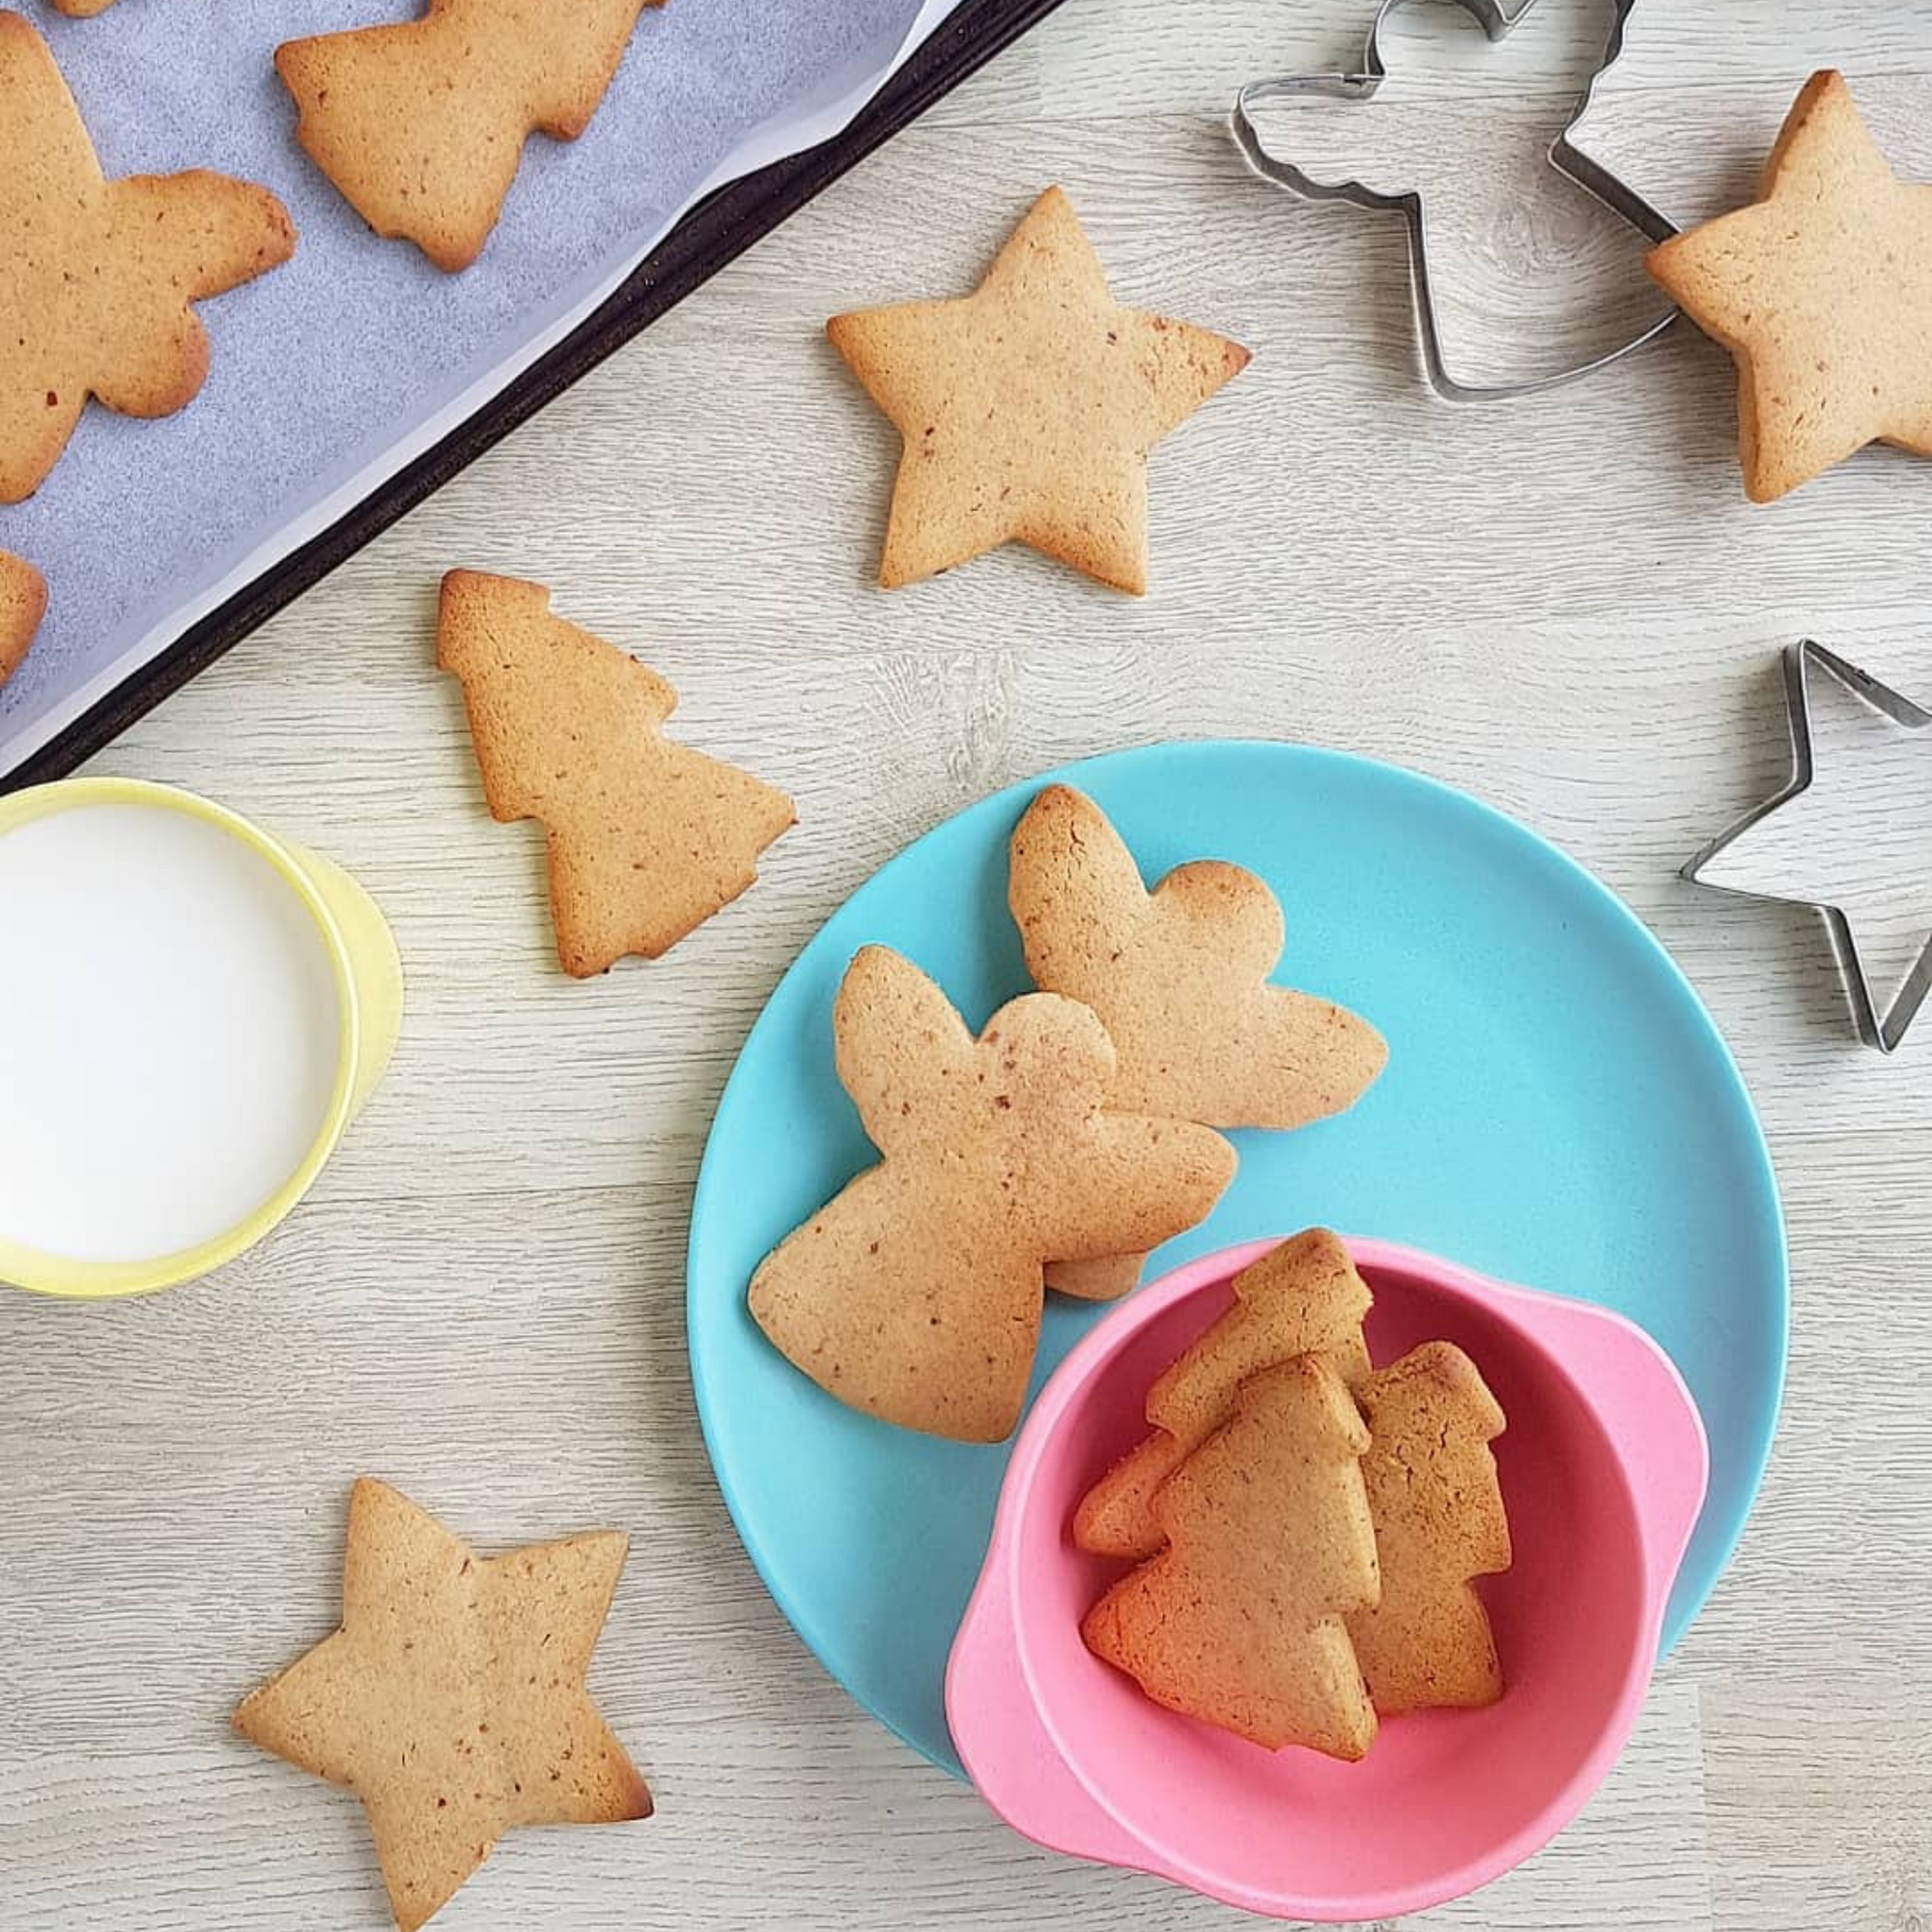 Gingerbread biscuits, A yummy Christmas recipe.